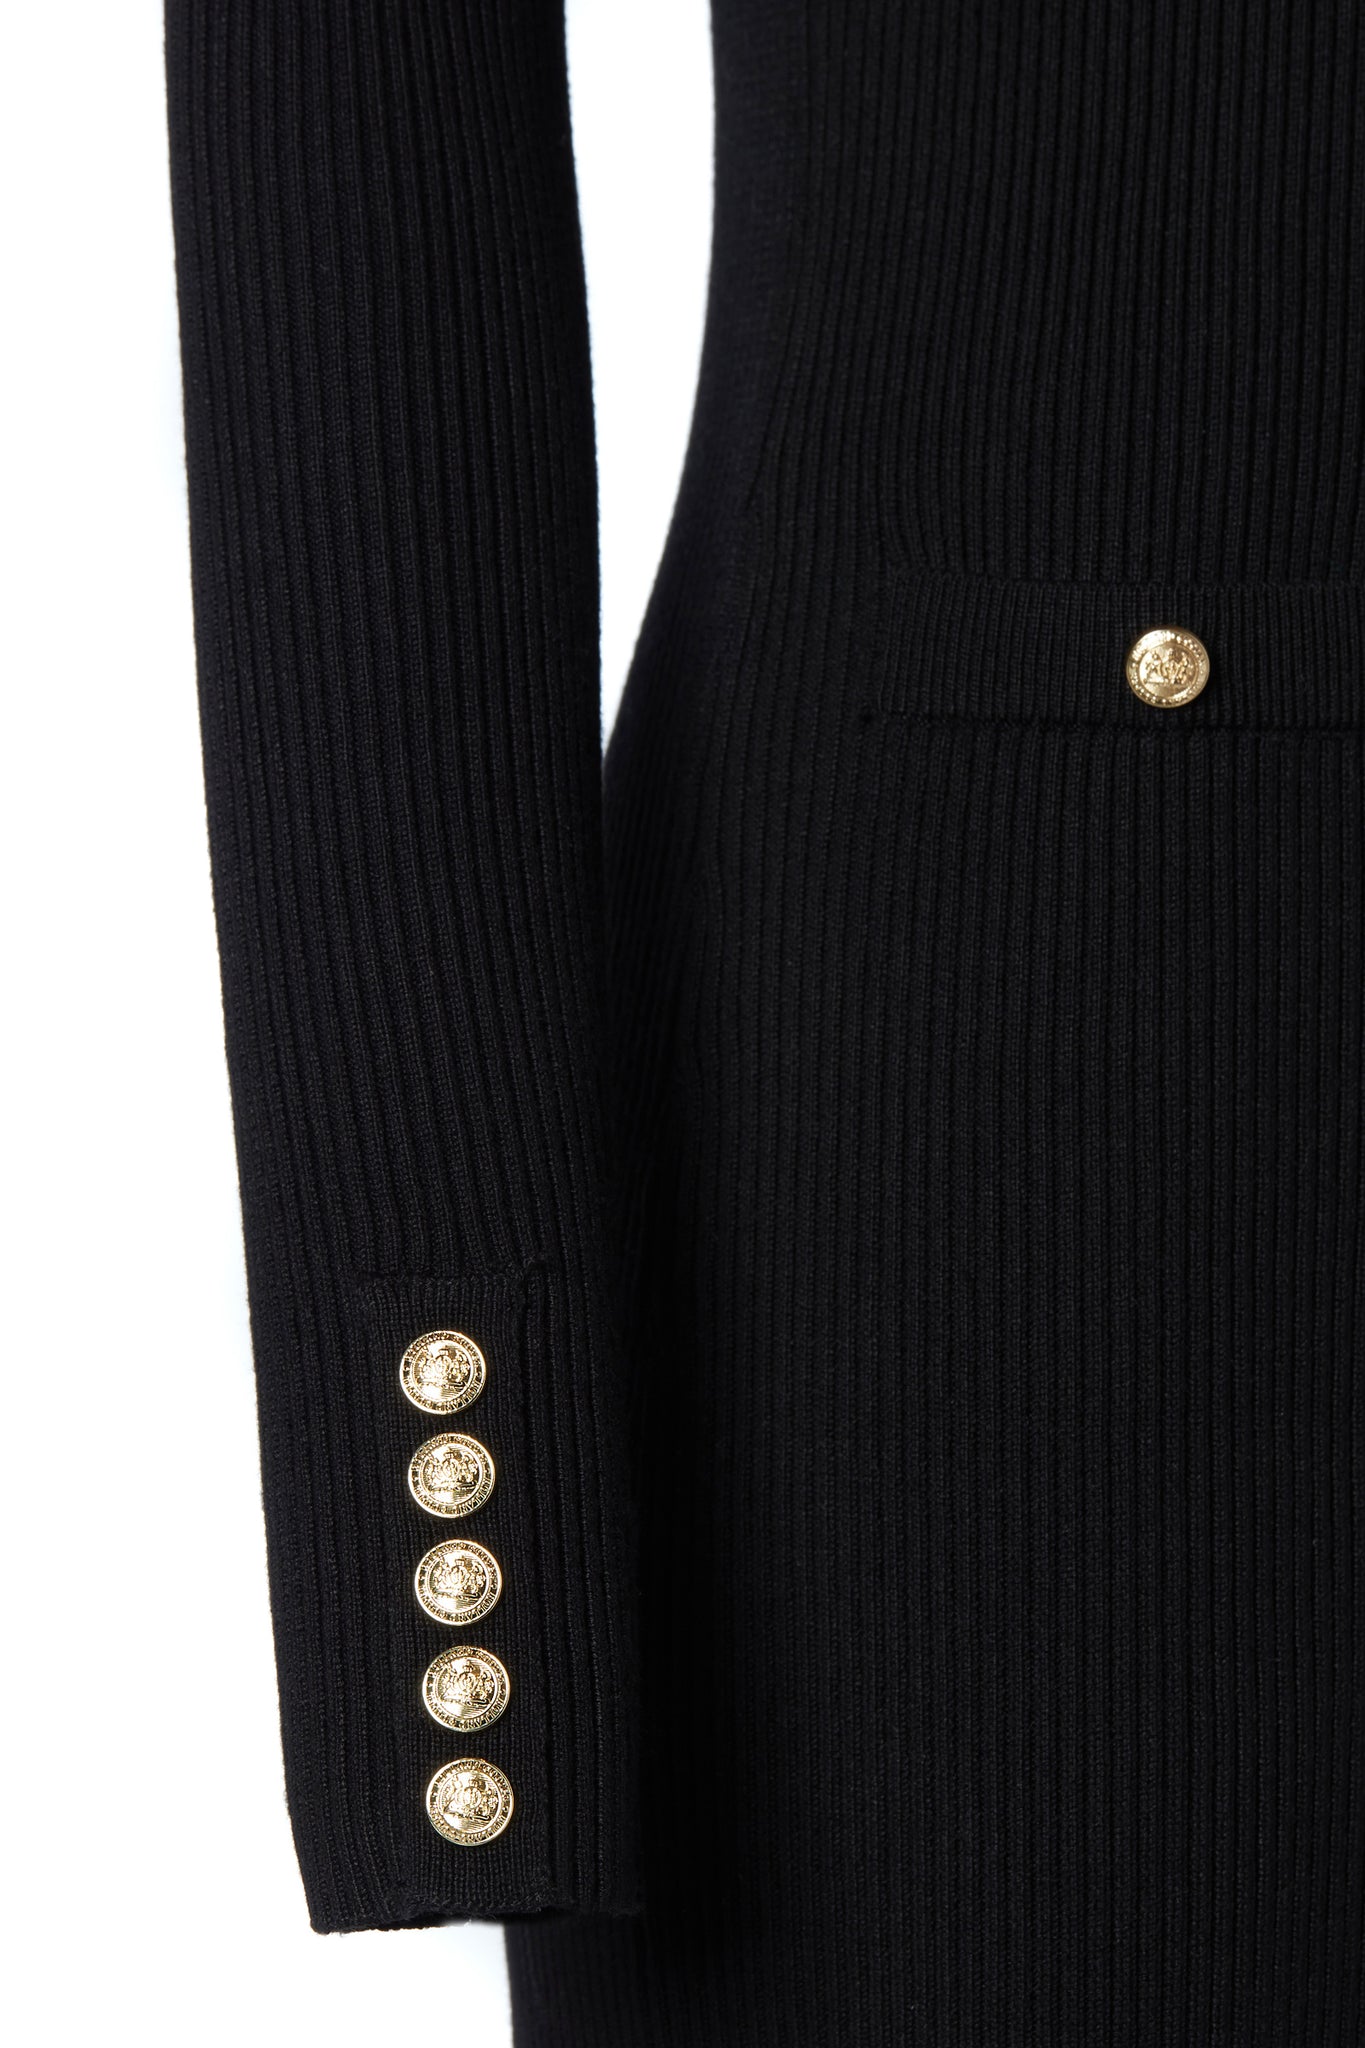 gold button detail on cuffs of womens slim fit crew neck long sleeve knitted dress in black with gold button detail down the centre front and two welt pockets on chest and two on the hips with gold buttons on the centre of each pocket